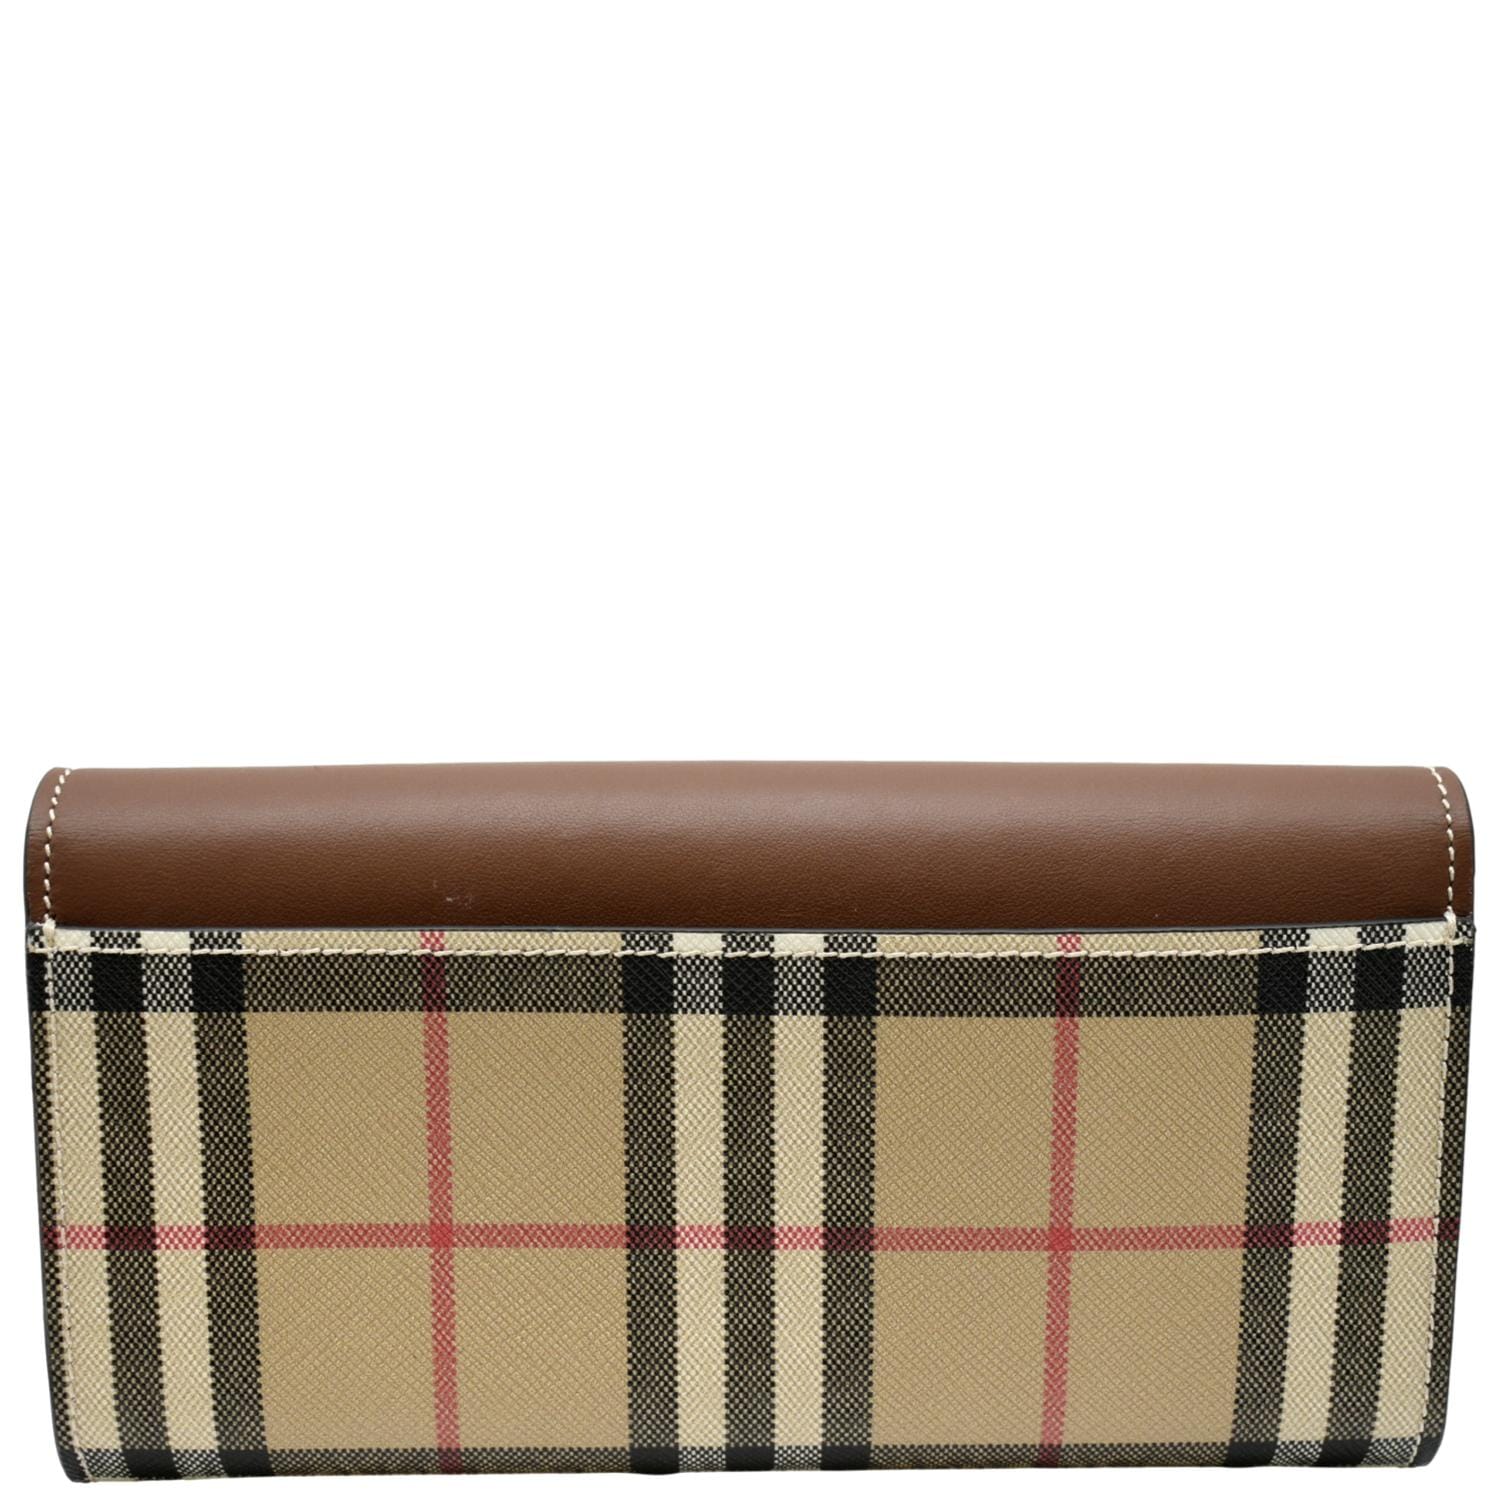 Burberry Check Leather Continental Wallet - Farfetch